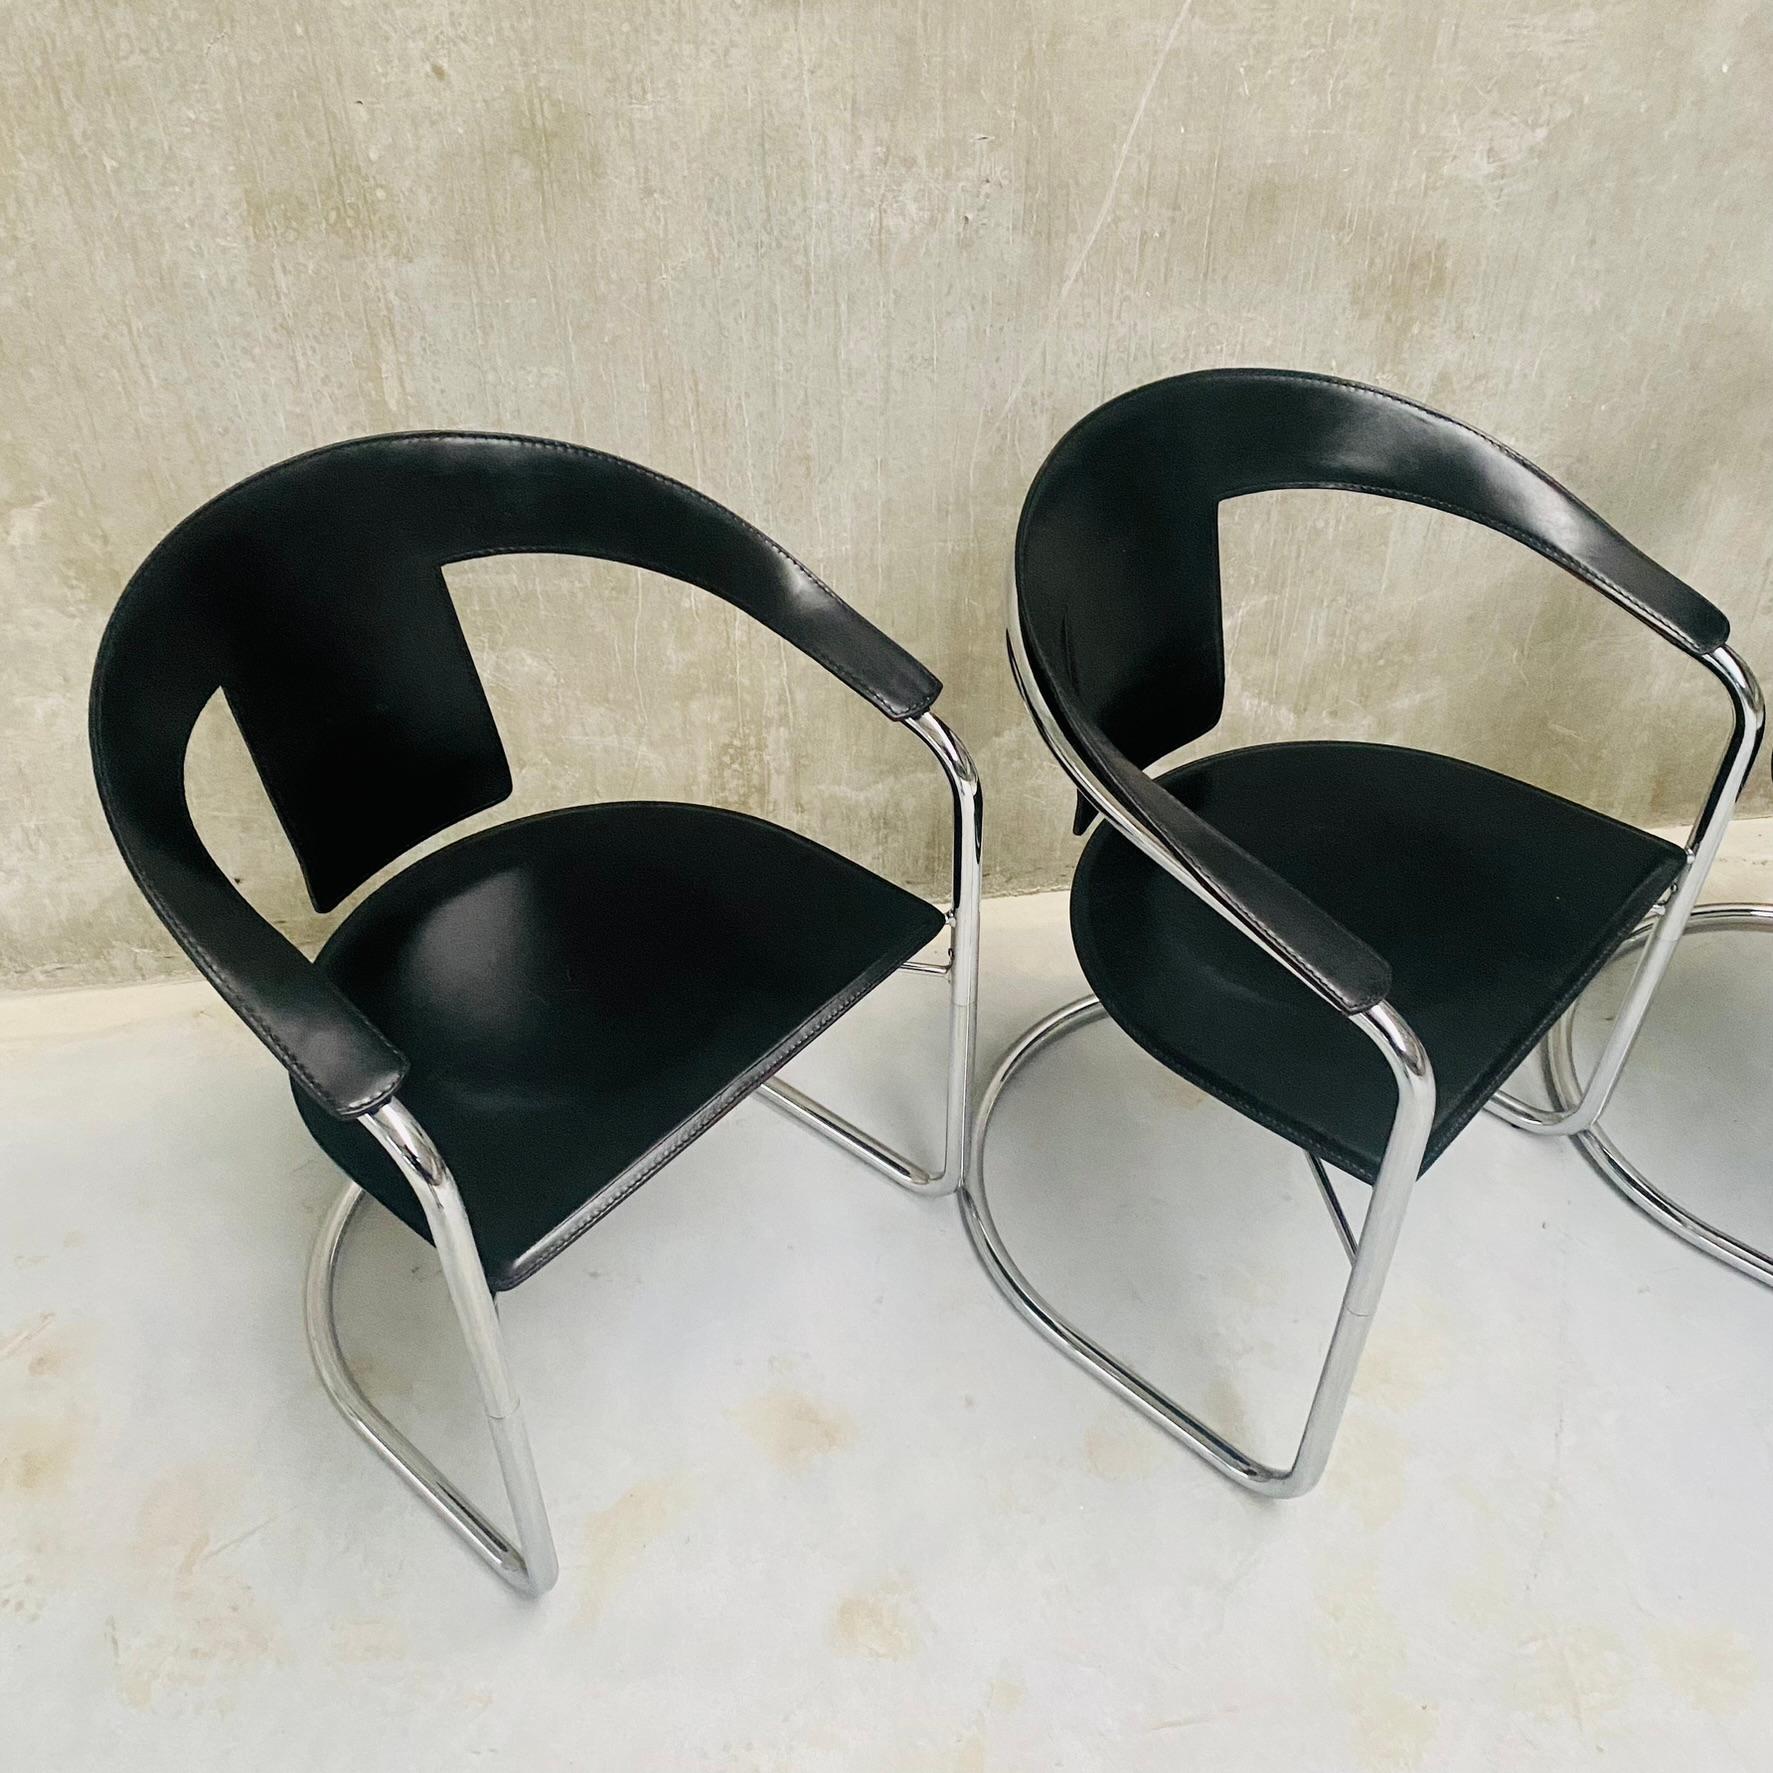 4 x Lo Studio Black Saddle Leather Dining Chairs by A. Rizzatto Italy 1980 7